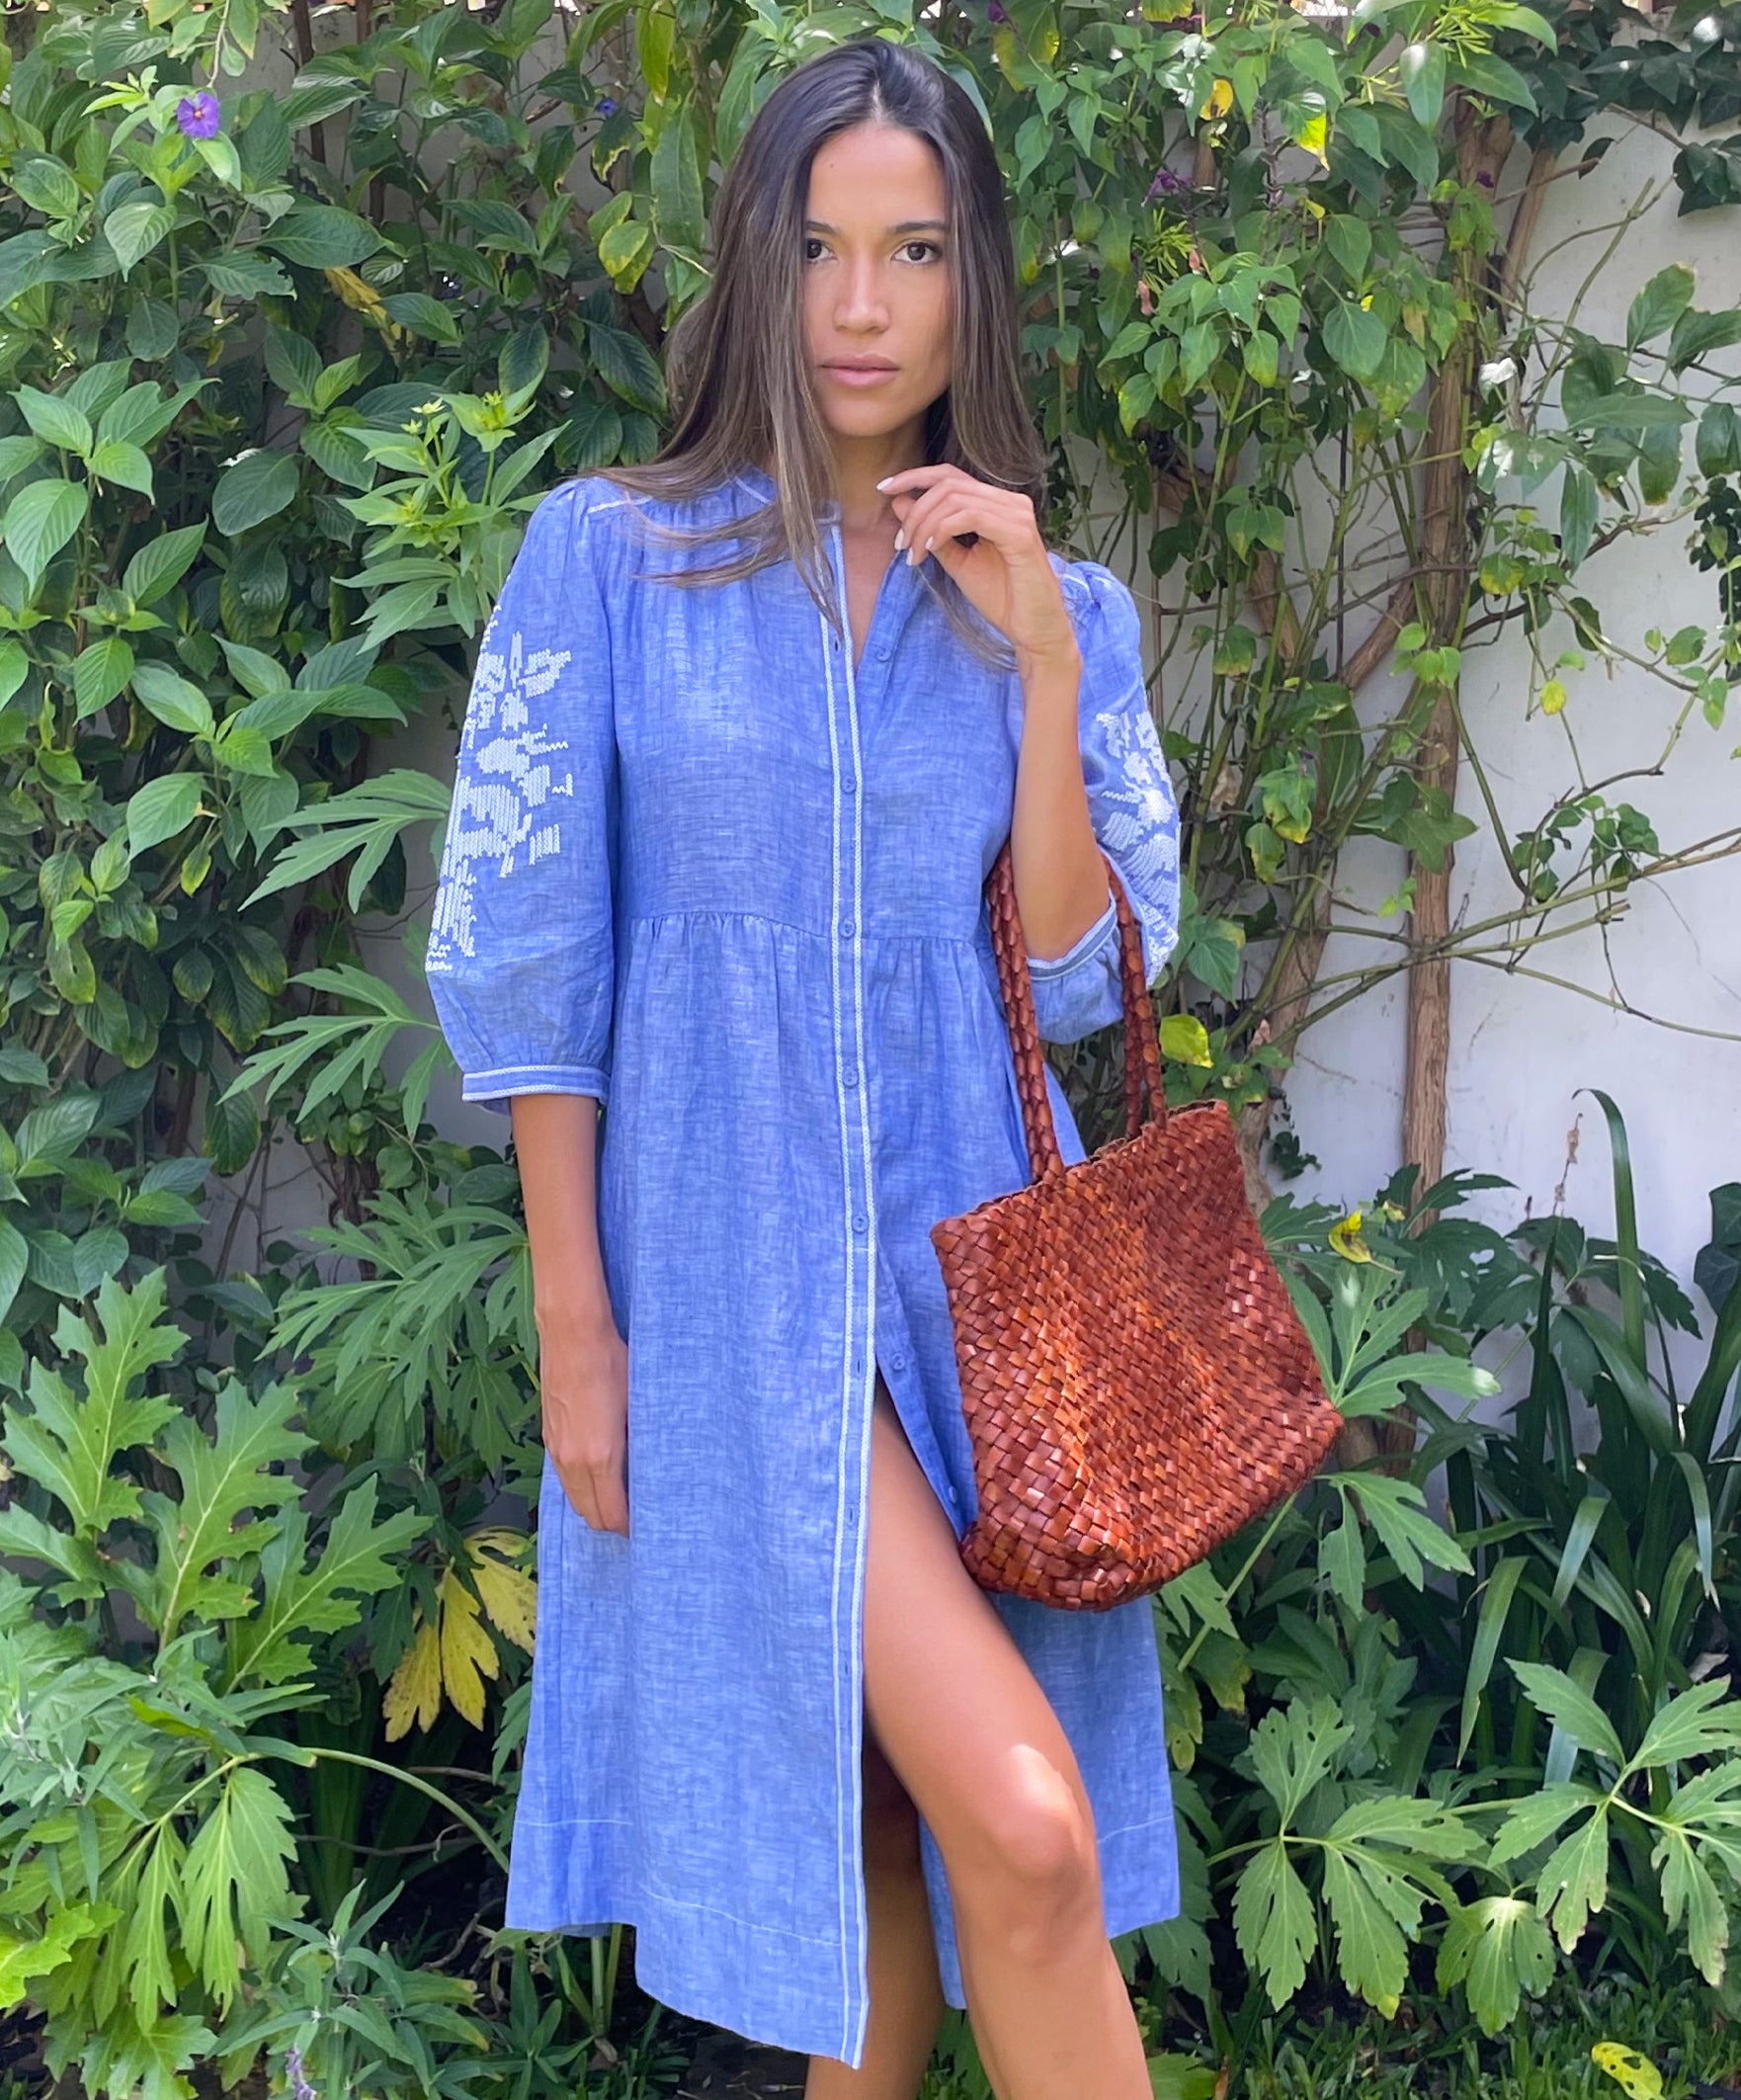 A model in a garden wearing a Rose and Rose blue linen Sicily dress and holding a Dragon Diffusion woven leather bag.